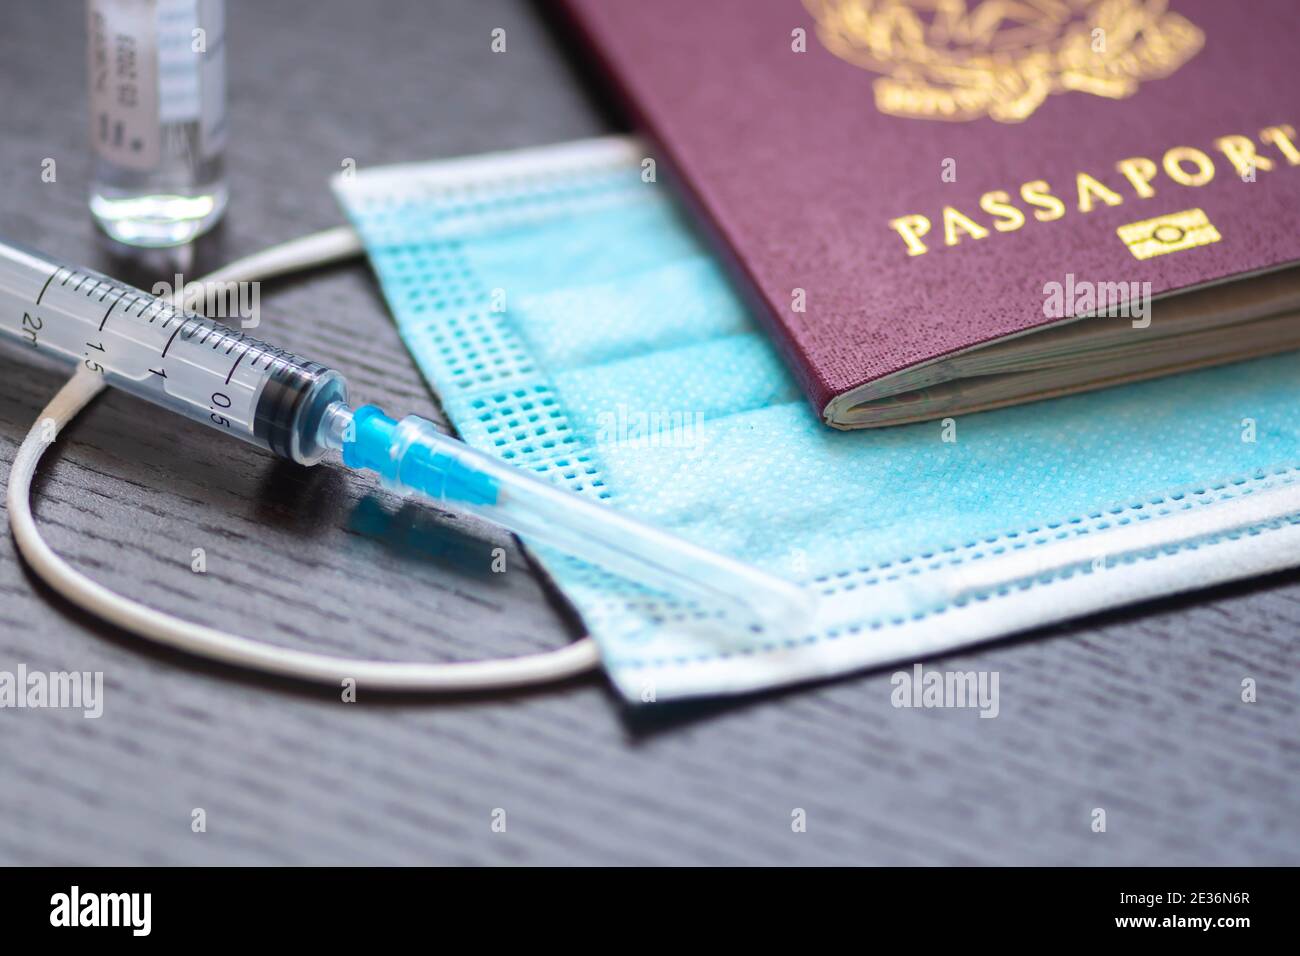 Syringe, vial, surgical face mask and passport or visa on a white table ready to be used. Covid or Coronavirus vaccine background, Covid-19 immunity p Stock Photo